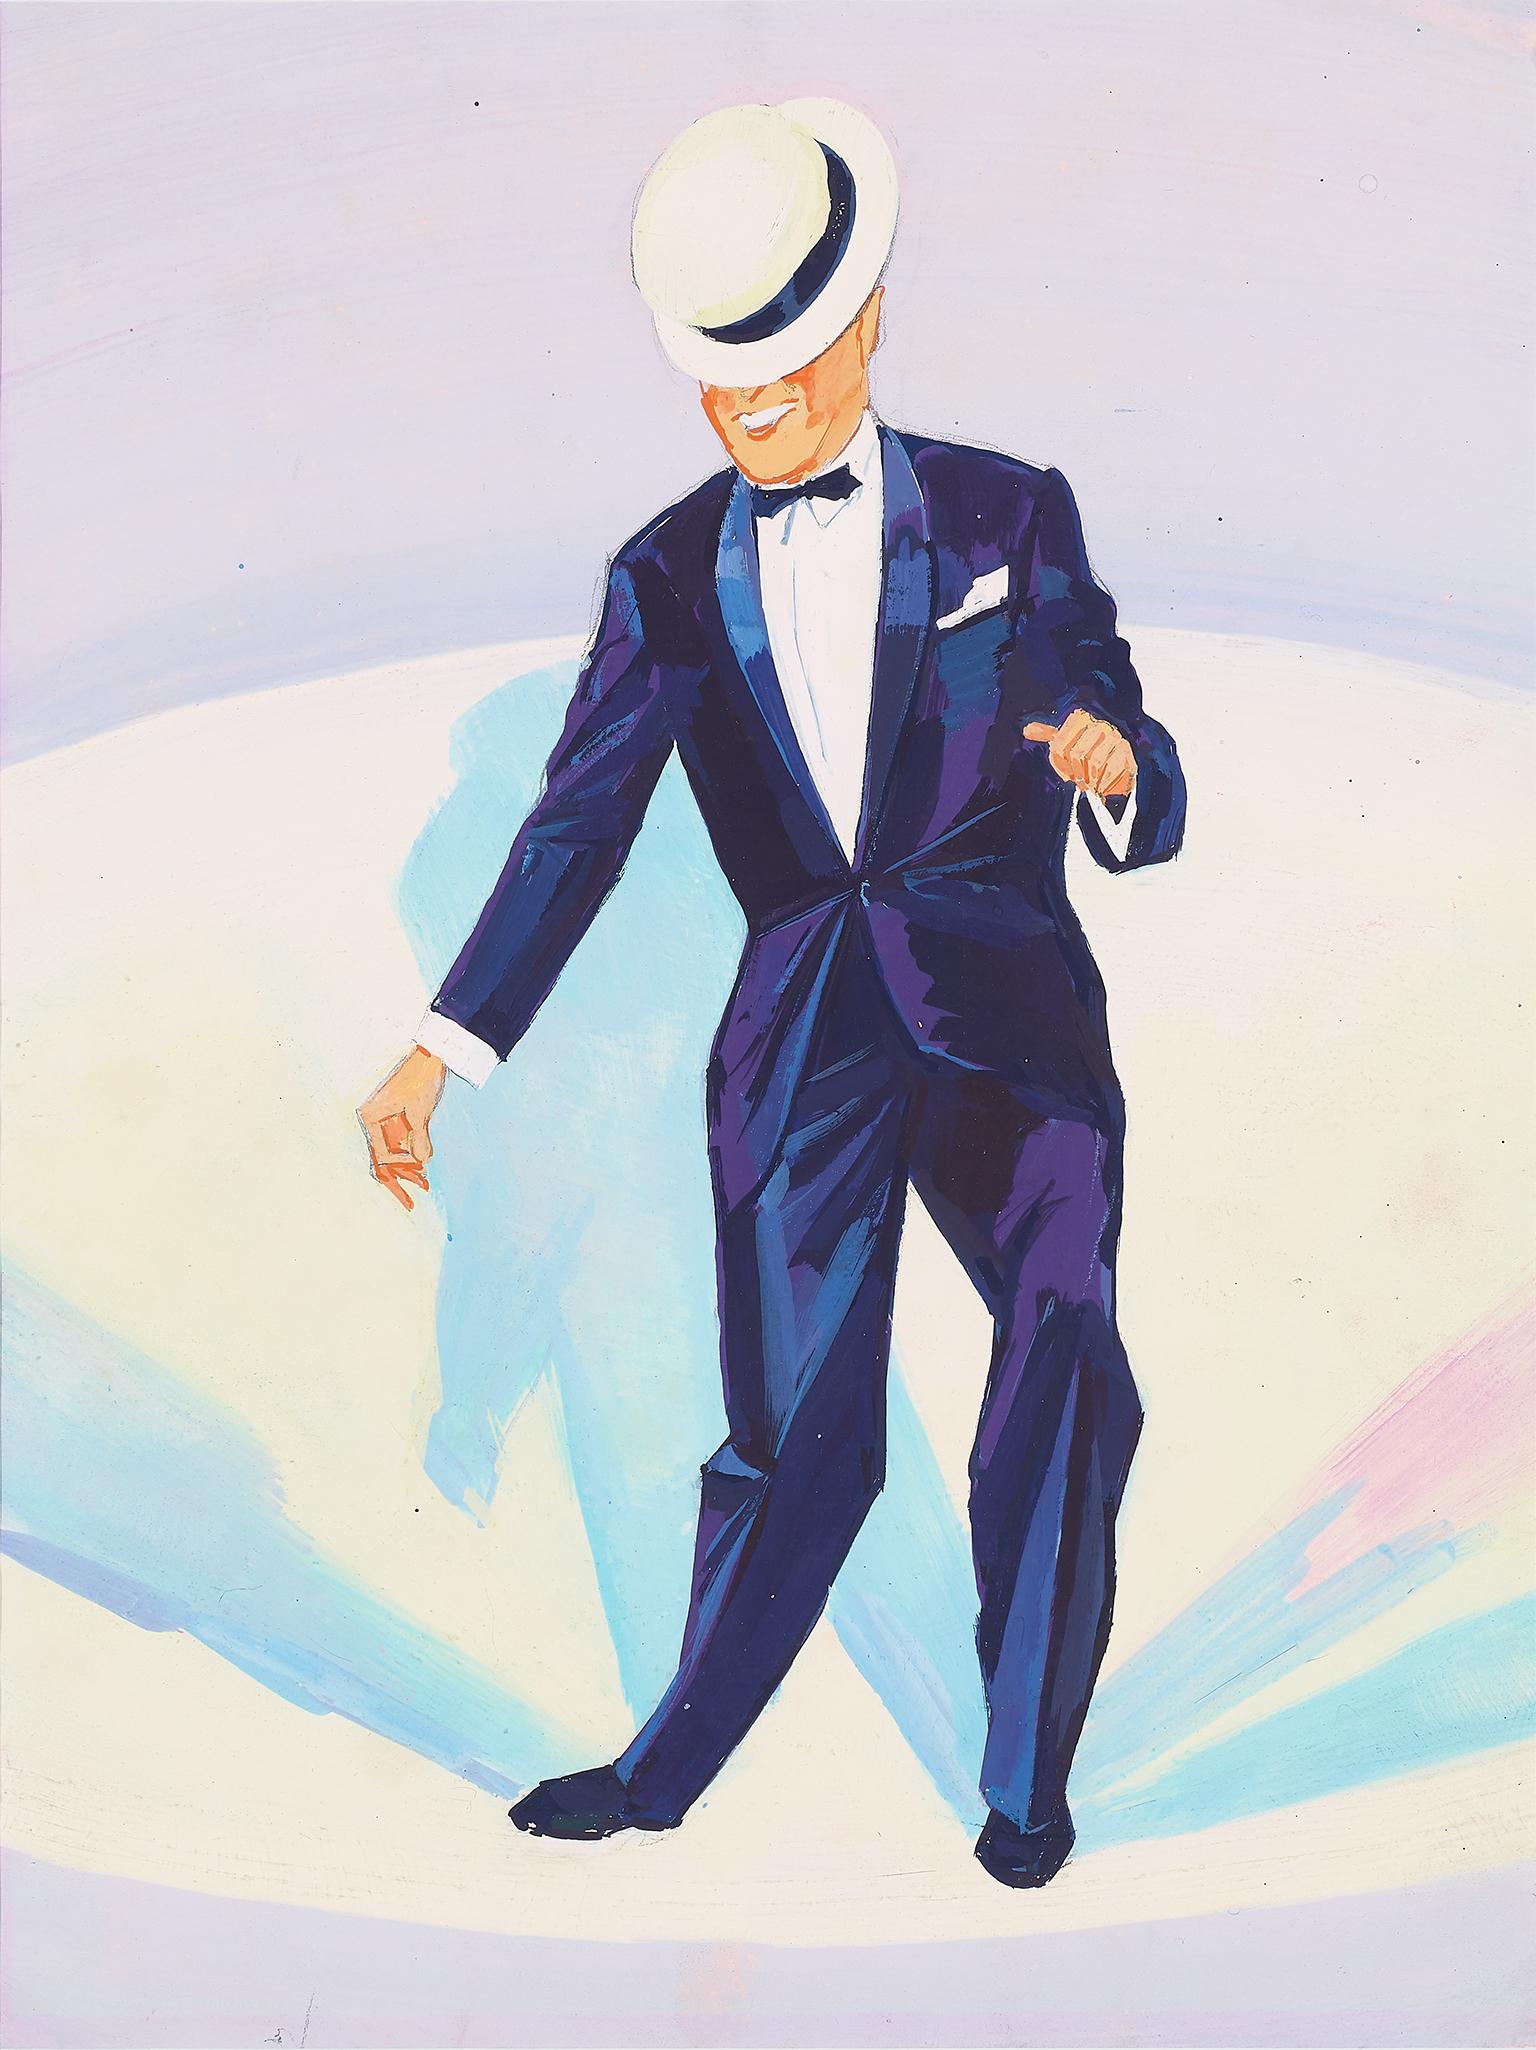 Maurice Chevalier dancing with tuxedo .PARIS Mon Amour  - Art by james rassiat 